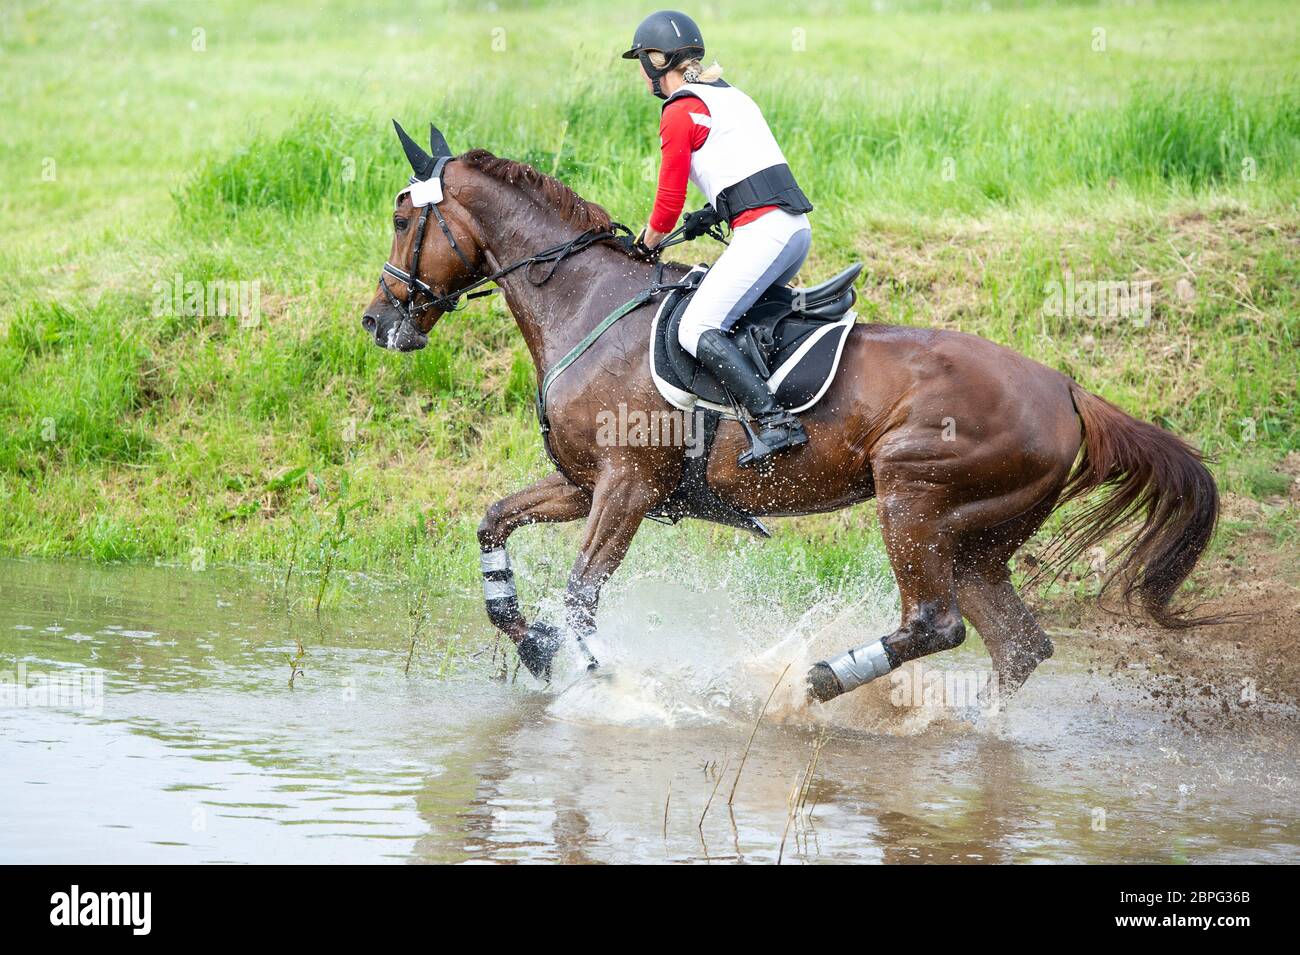 Eventing: equestrian rider jumping over an a log fence obstacle Stock Photo